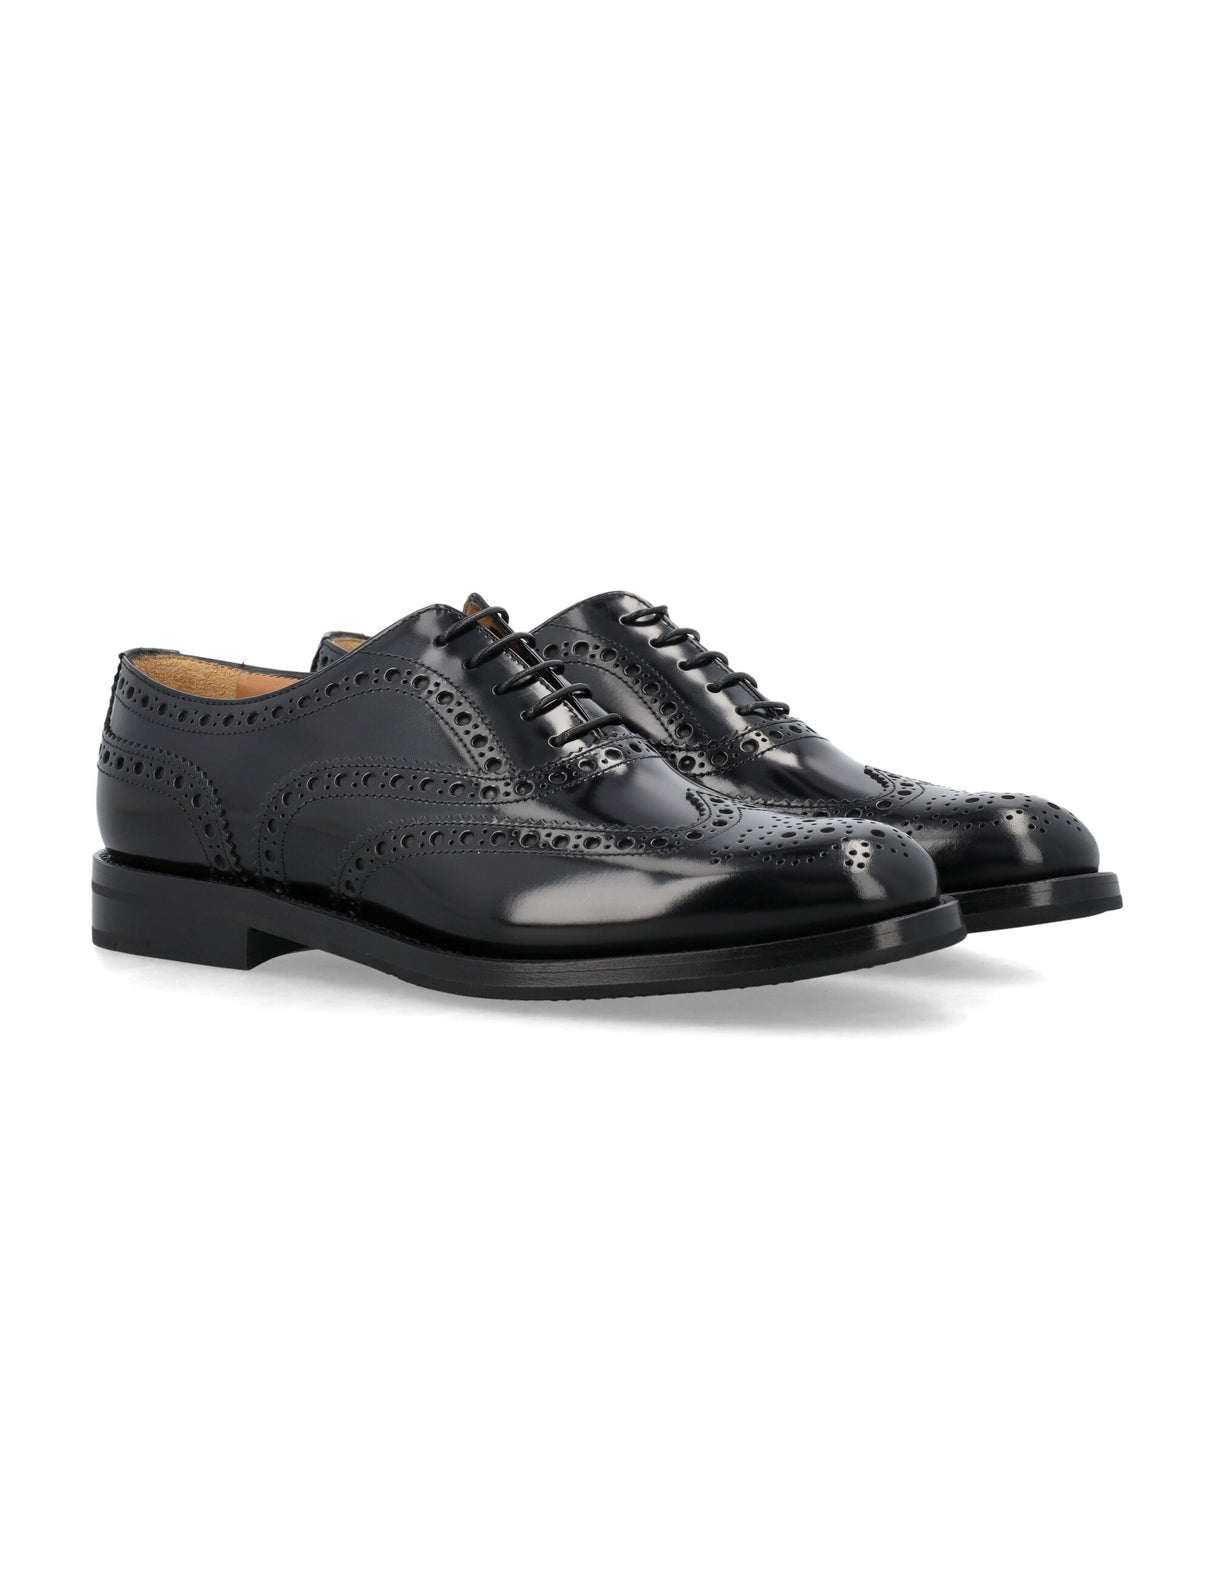 CHURCH'S Black Brushed Calfskin Lace-Up Shoes for Women with Full Brogue and Diamond Rubber Sole